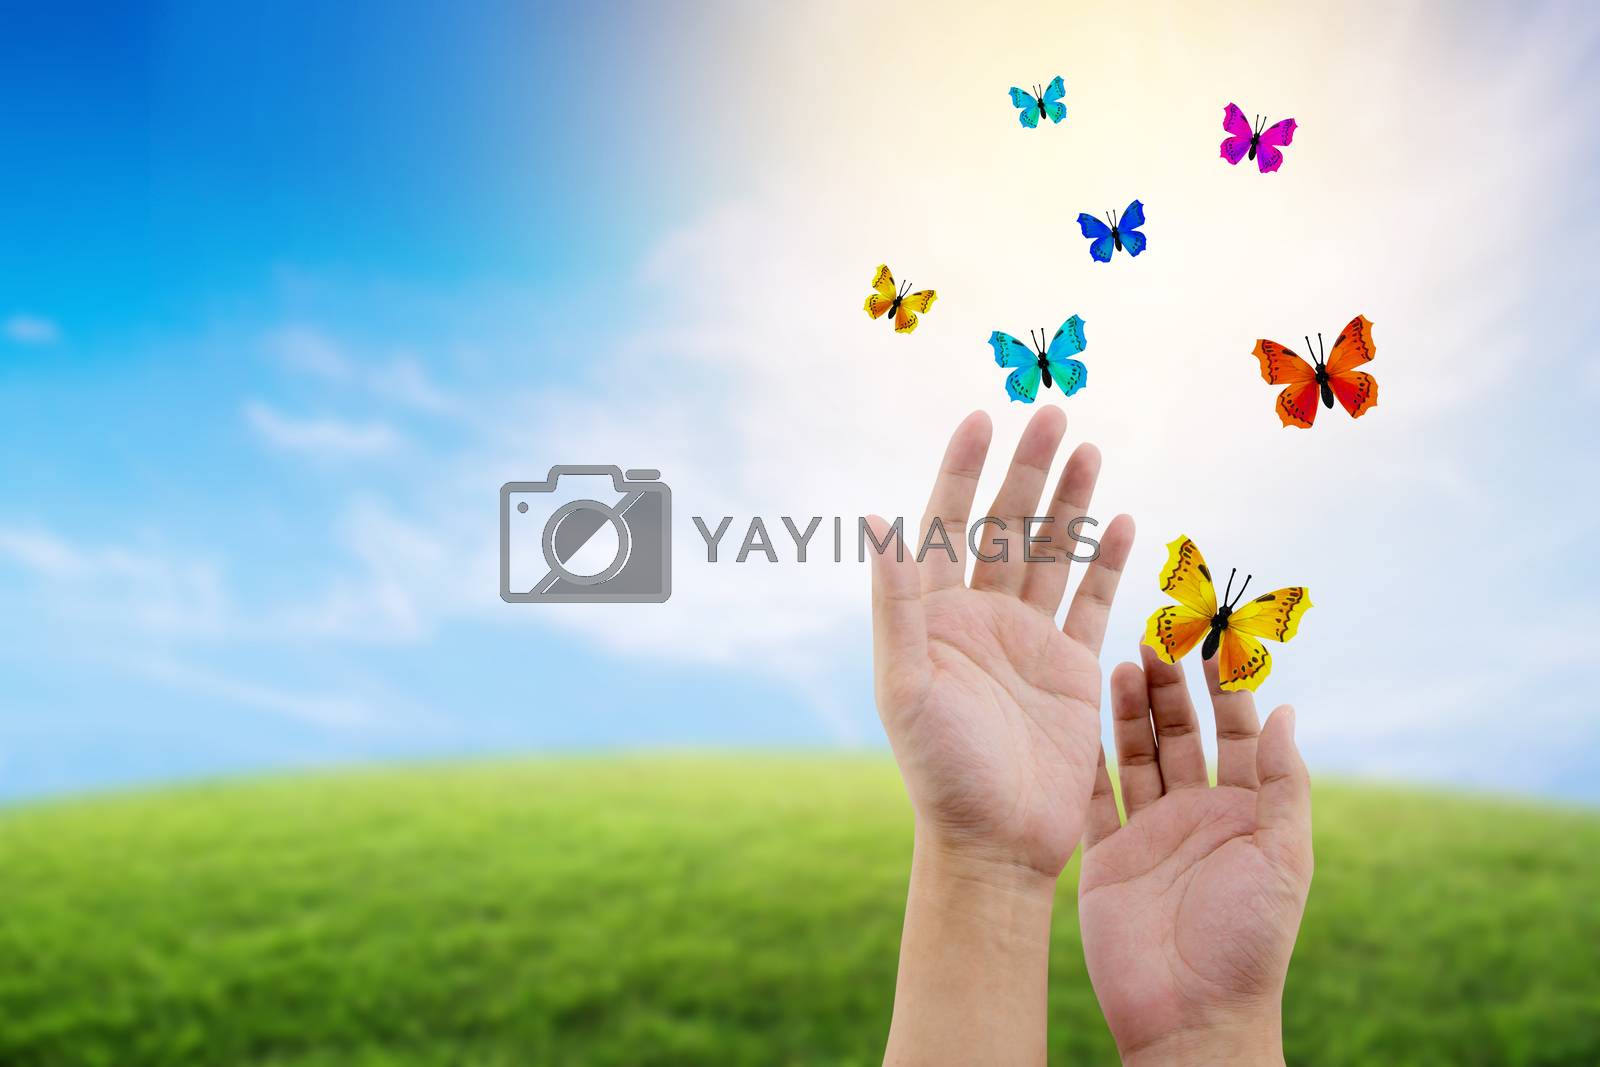 Royalty free image of butterfly flying outdoors on a beautiful nature with freedom env by nnudoo